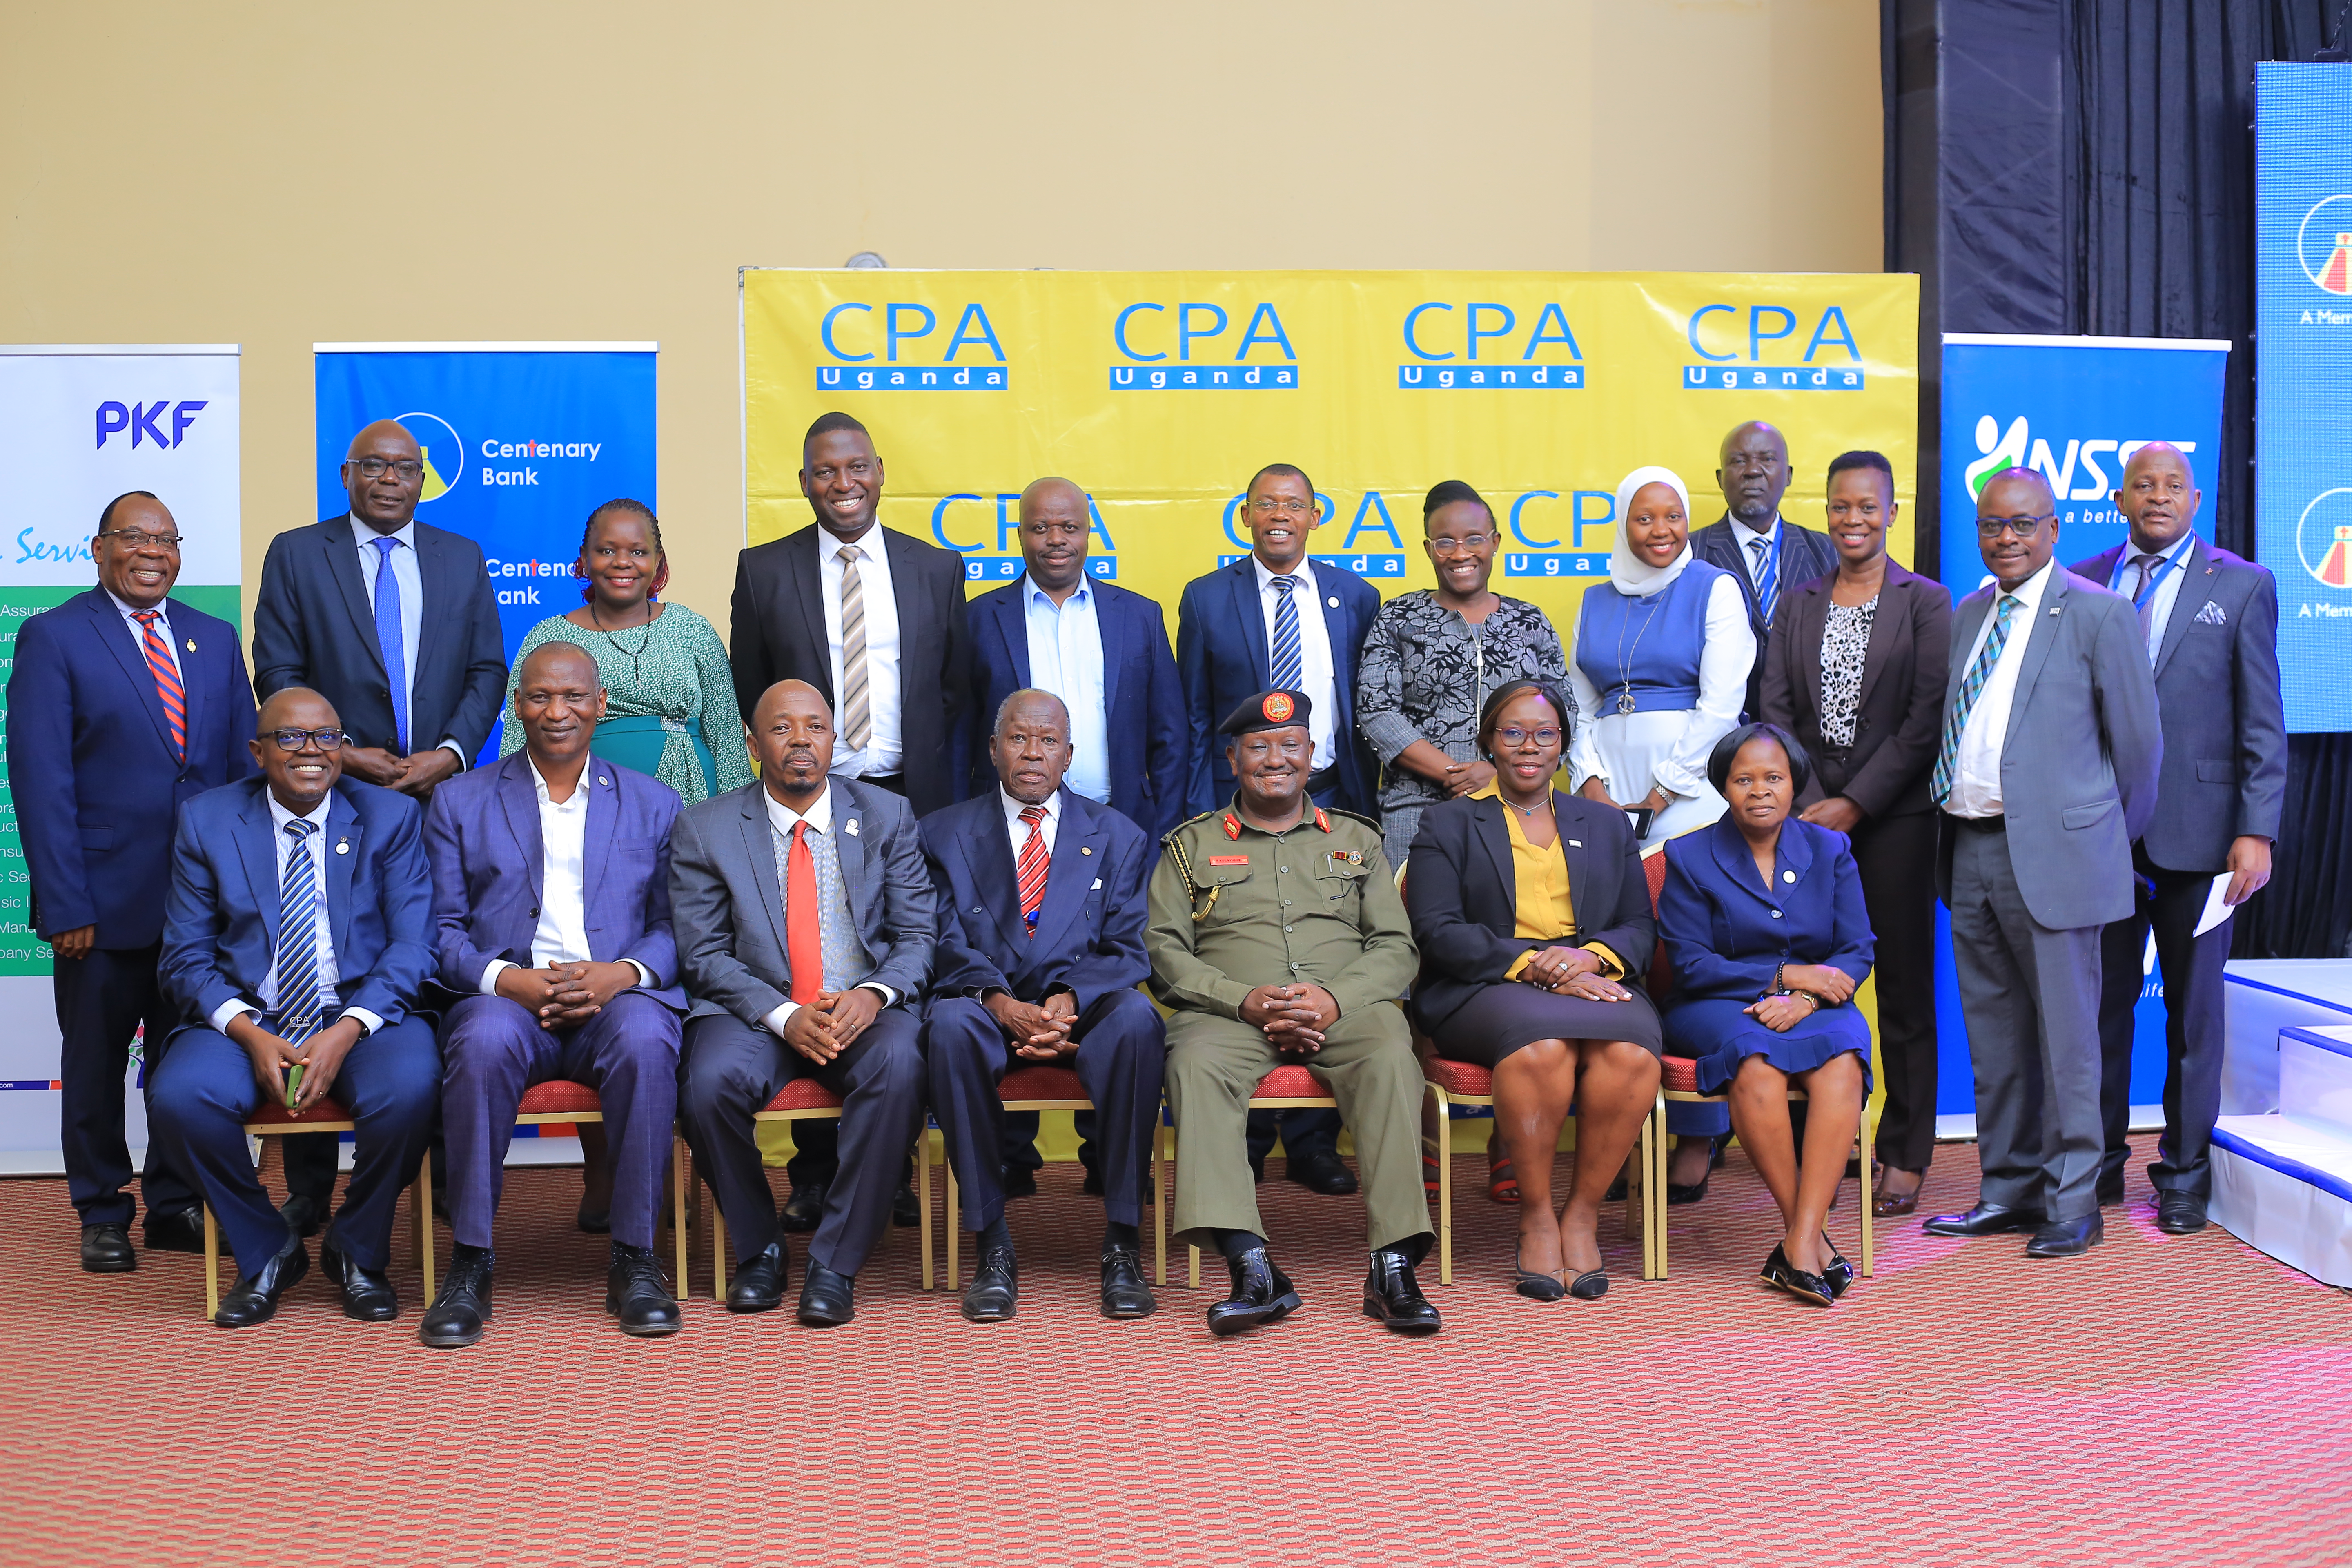 ICPAU President CPA Josephine Okui Ossiya (Seated-2nd right), Brig. Gen. Felix Kulayigye (Seated 3rd right) posing for photograph with some Council members and ICPAU Past Presidents.